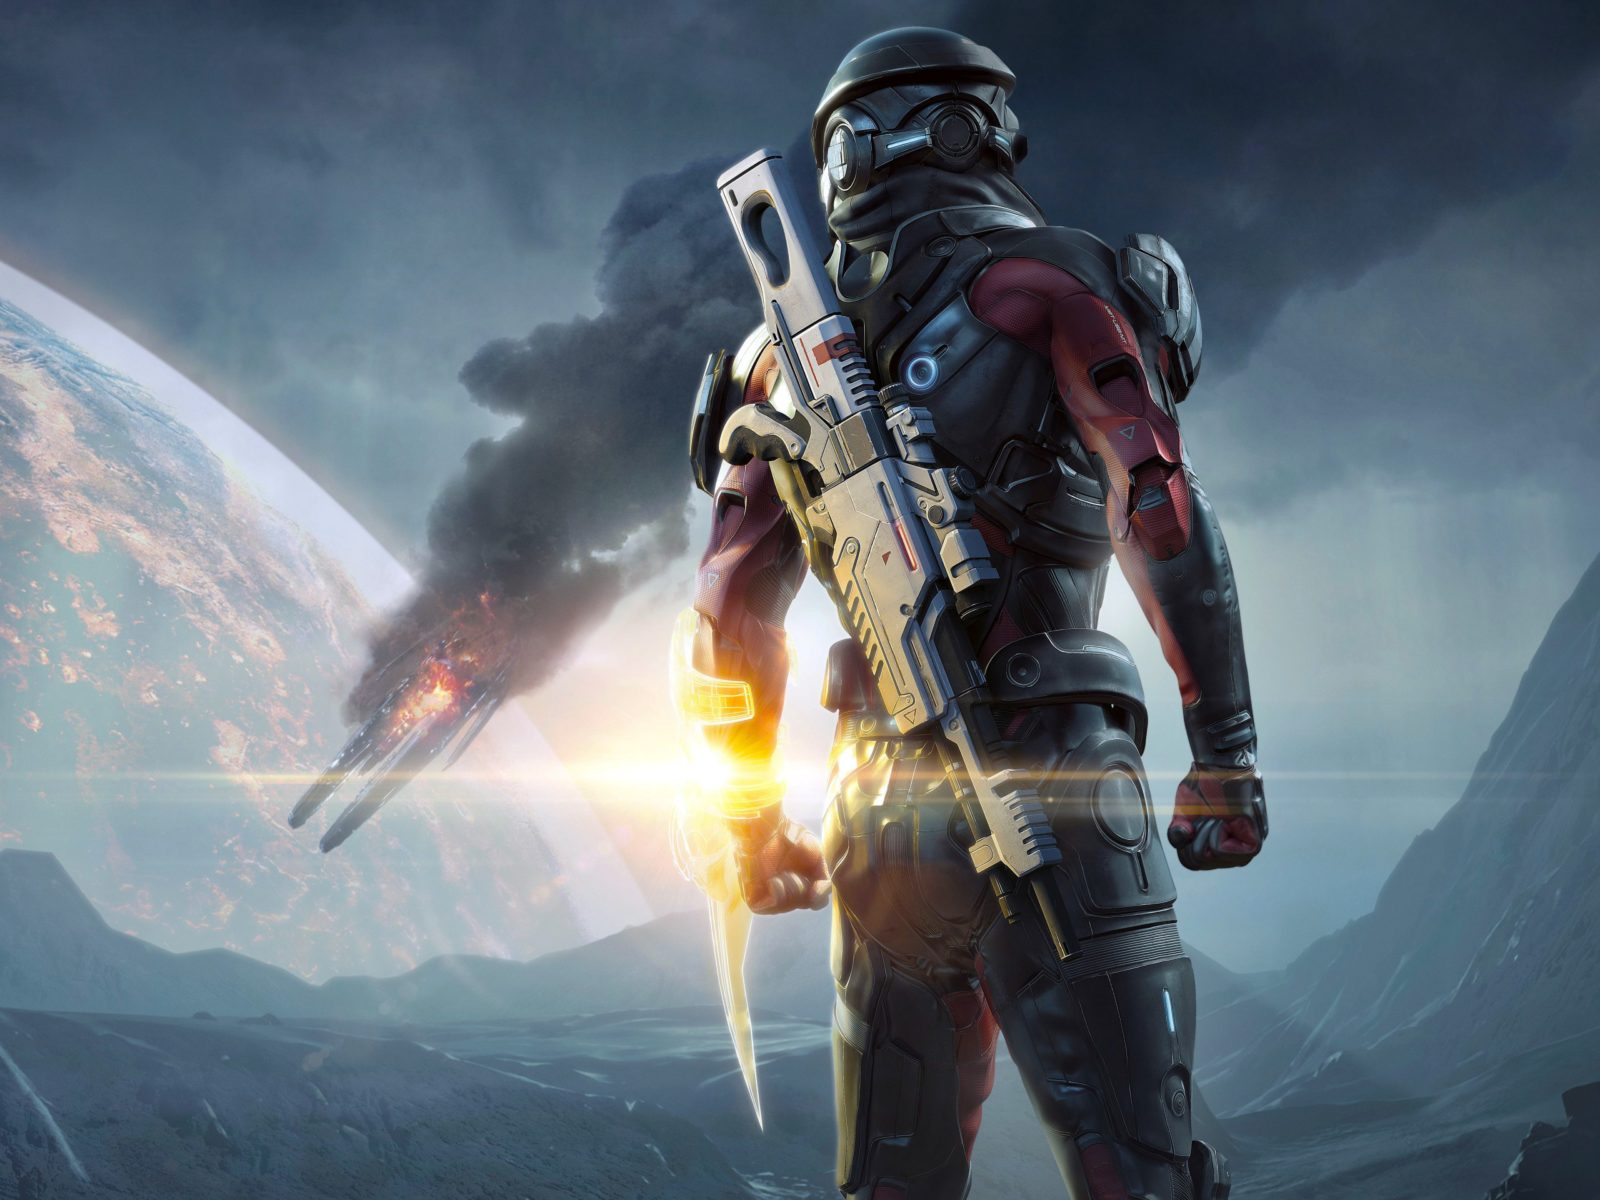 Mass Effect Andromeda 2017 Video Game 3d Hd Wallpapers Free Download – HD Wallpapers Backgrounds Desktop, iphone & Android Free Download